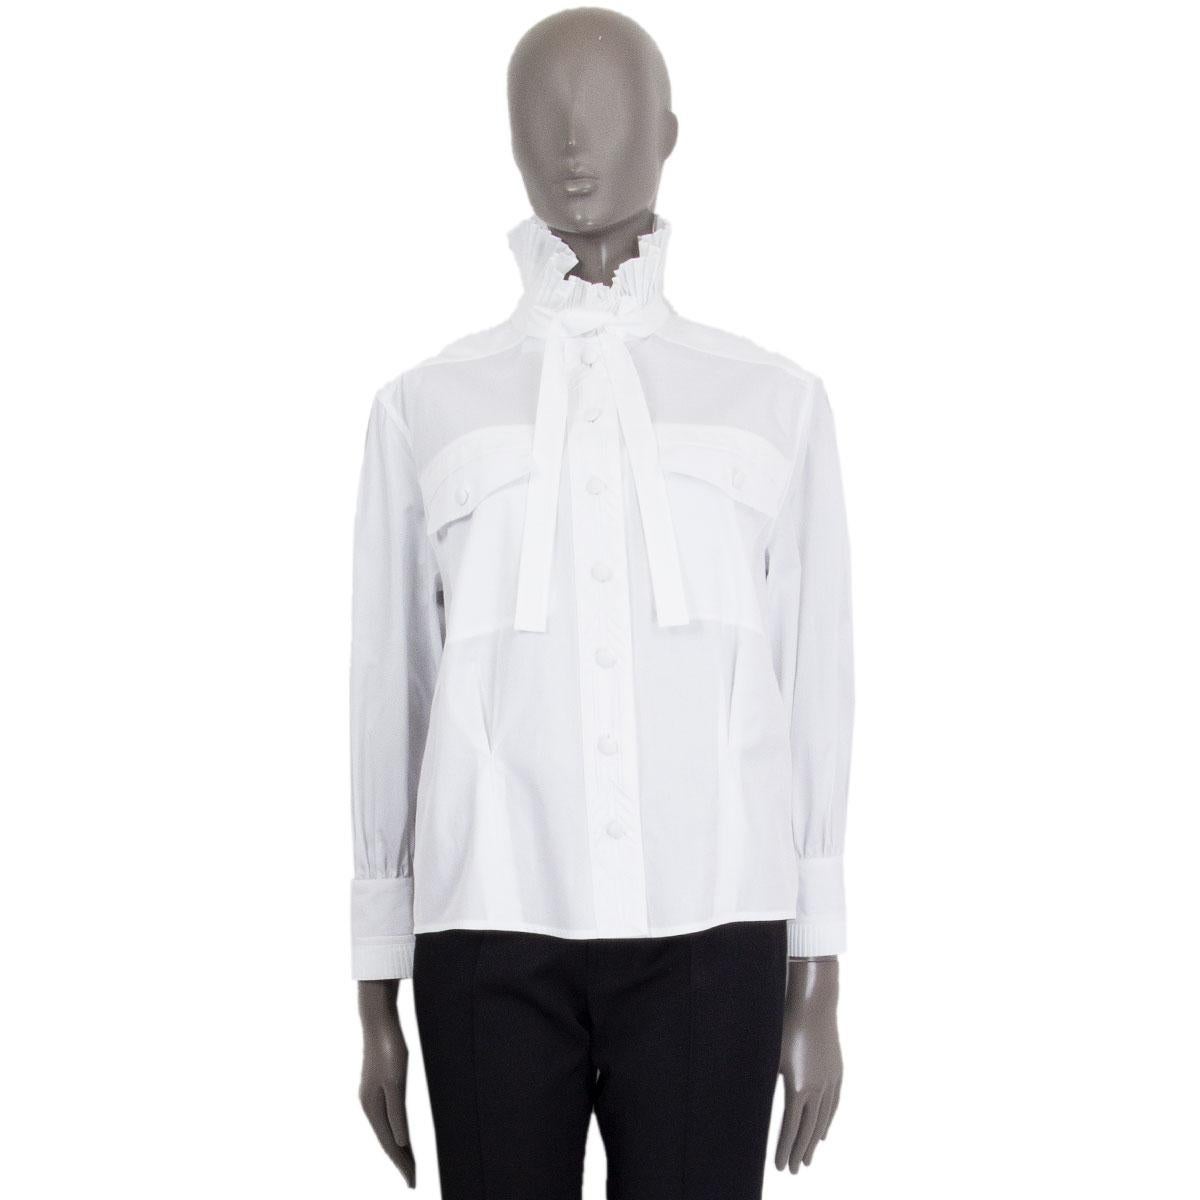 100% authentic Louis Vuitton bow shirt in white cotton (95%) and polyester (5%) with stand-up pleated-collar, two-button pleated cuffs, two chest flap-pockets and embroidered fly-front. Has been worn and is in excellent condition.

Tag Size 40
Size